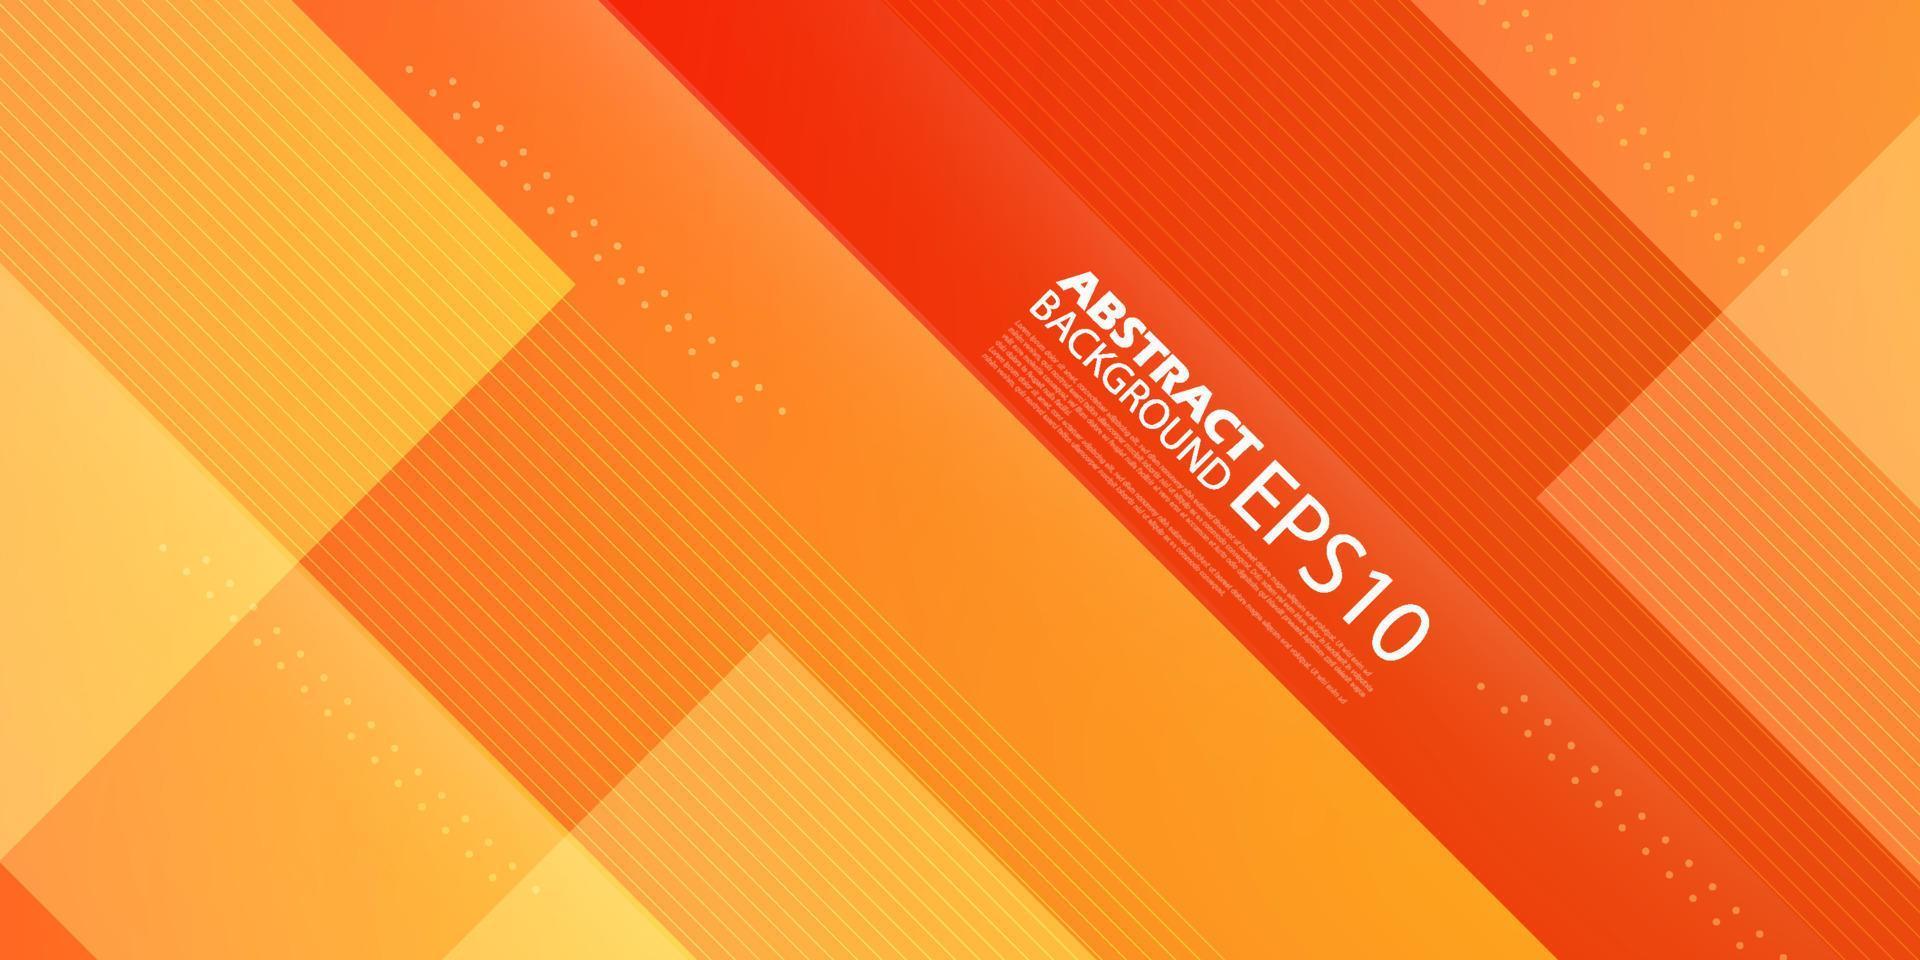 Geometric orange abstract background with simple lines. Colorful orange design. Bright and modern with 3d lights concept. Eps10 vector